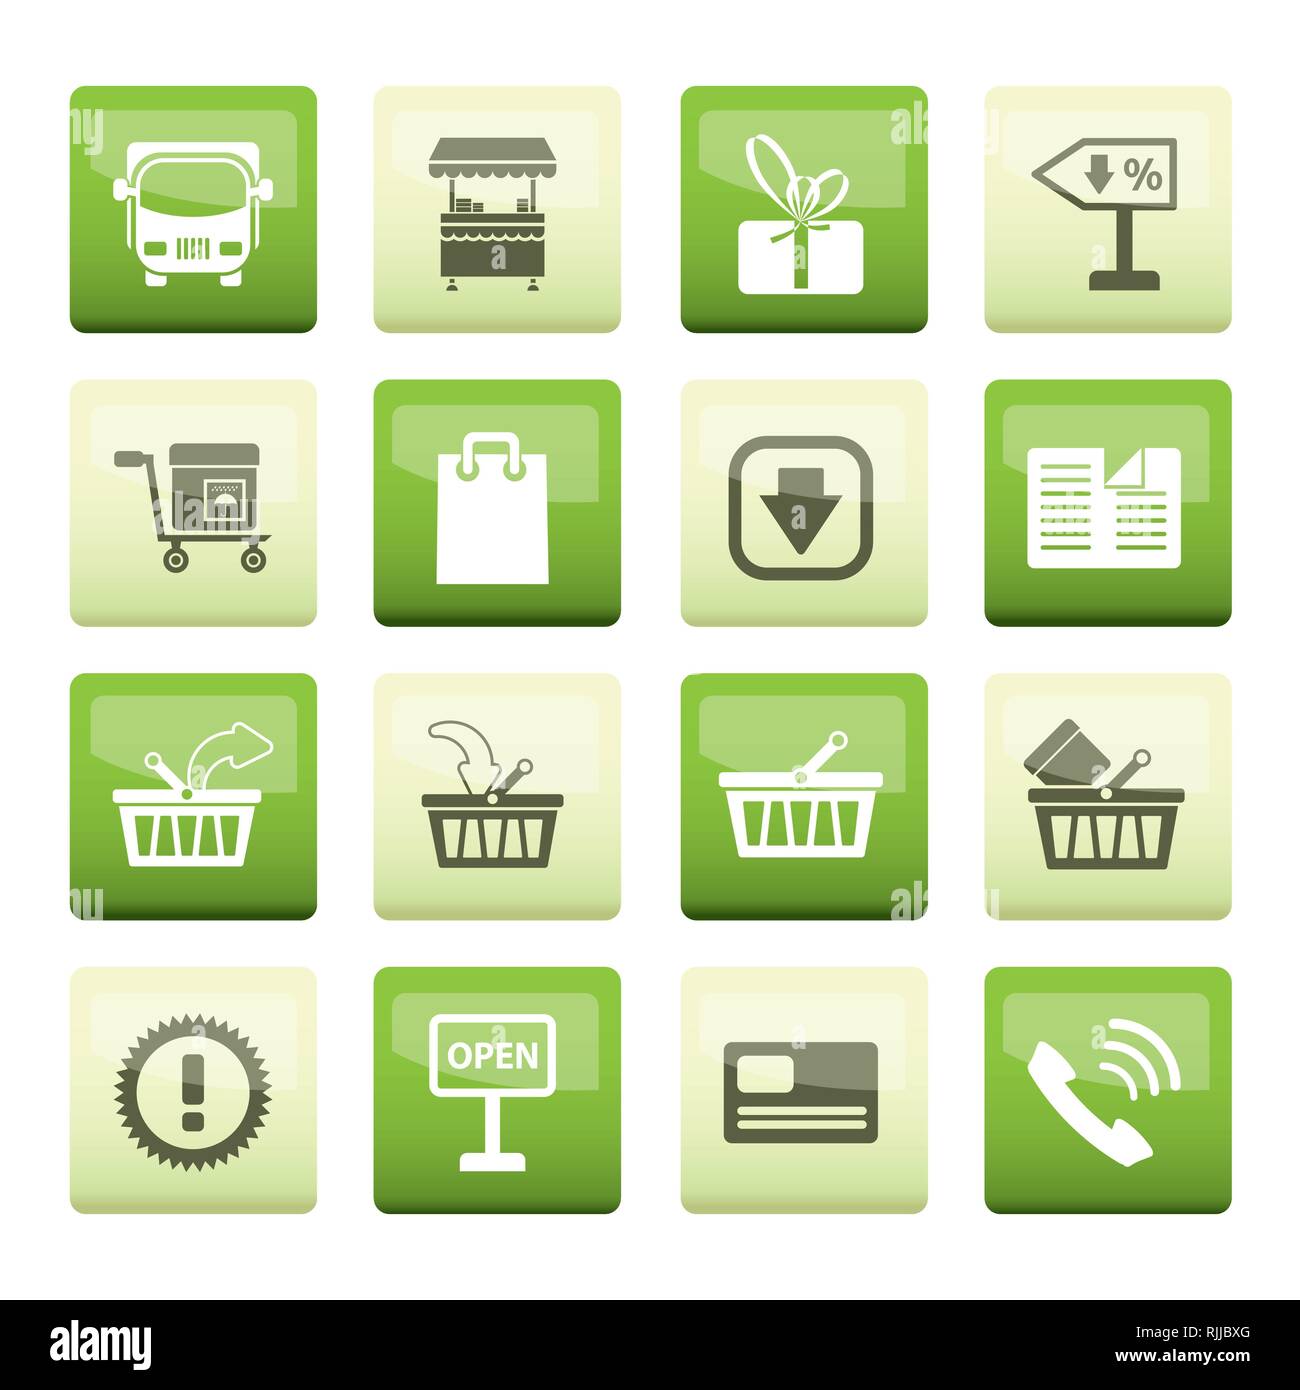 Online shop icons over green background - vector icon set Stock Vector